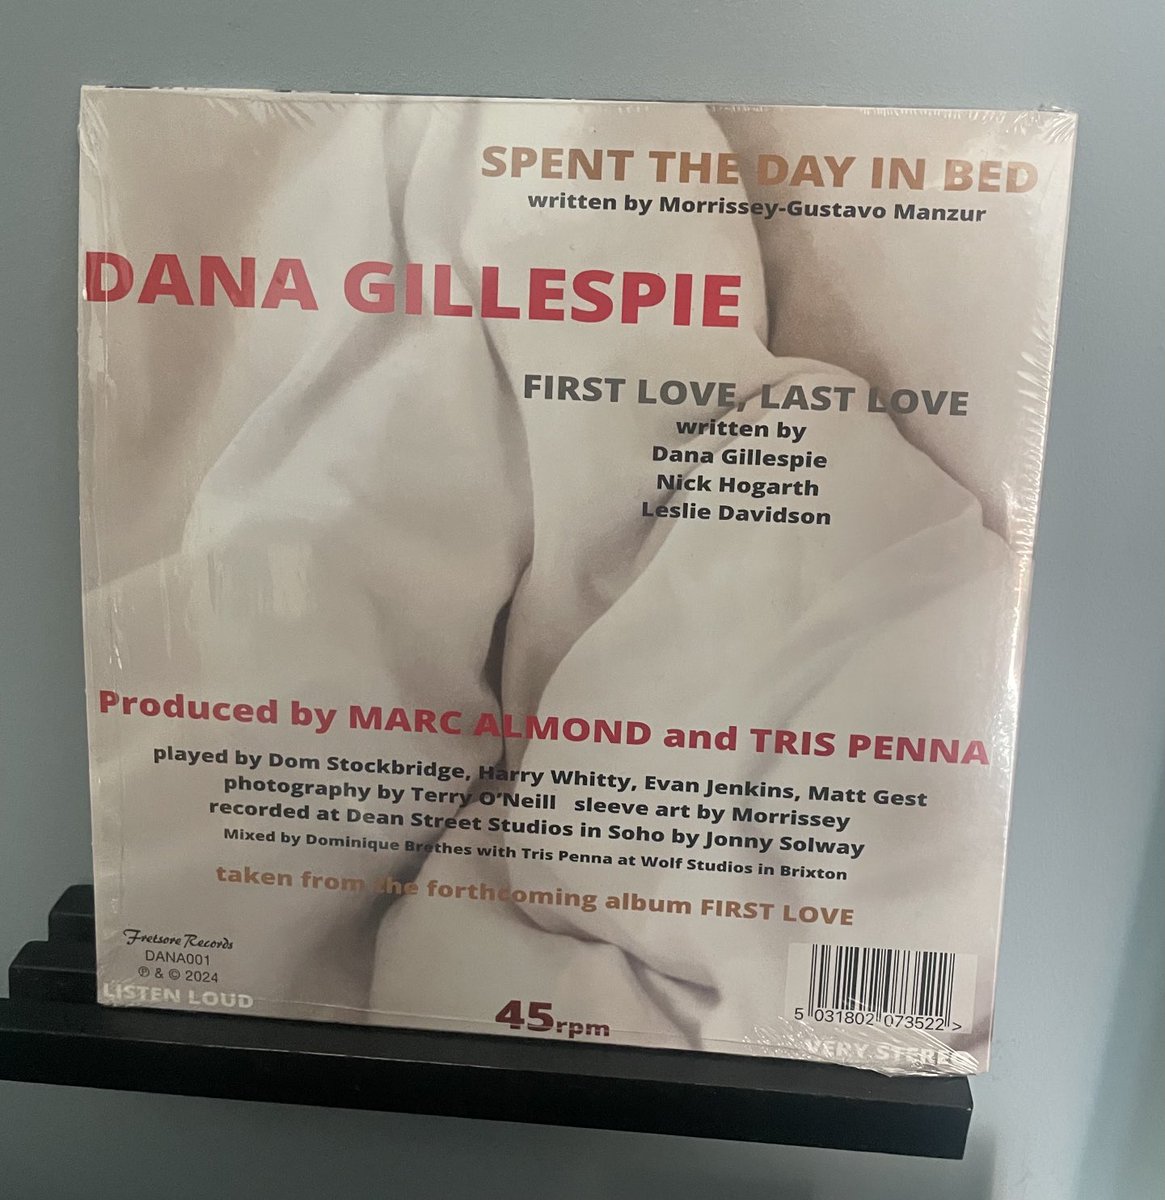 Spent the day in bed by Dana Gillespie is totally delicious! She should have been a massive star ⭐️ What a voice… ⚡️✨